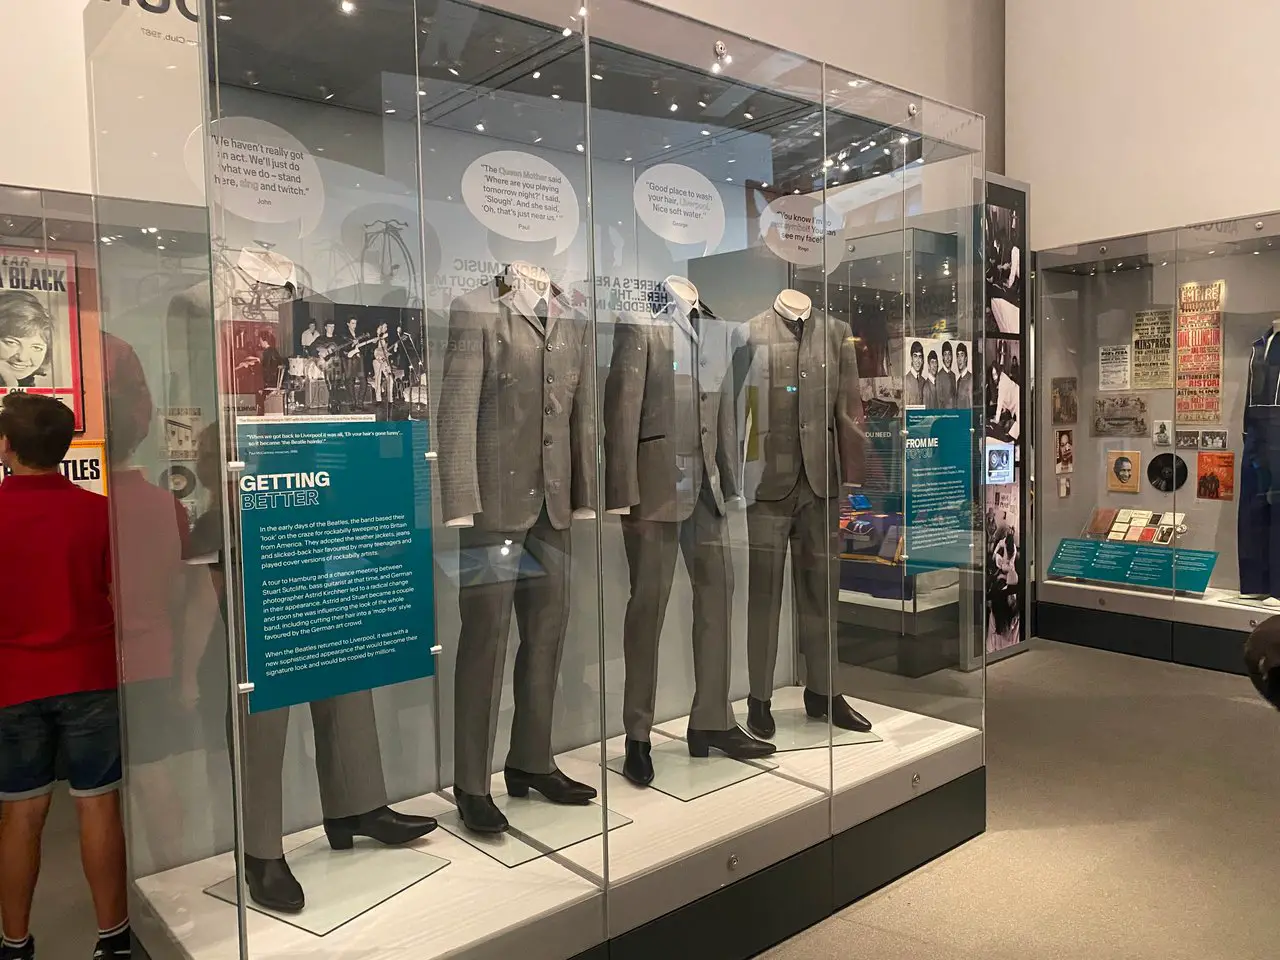 Display case inside the Museum of Liverpool showing grey suits worn by The Beatles